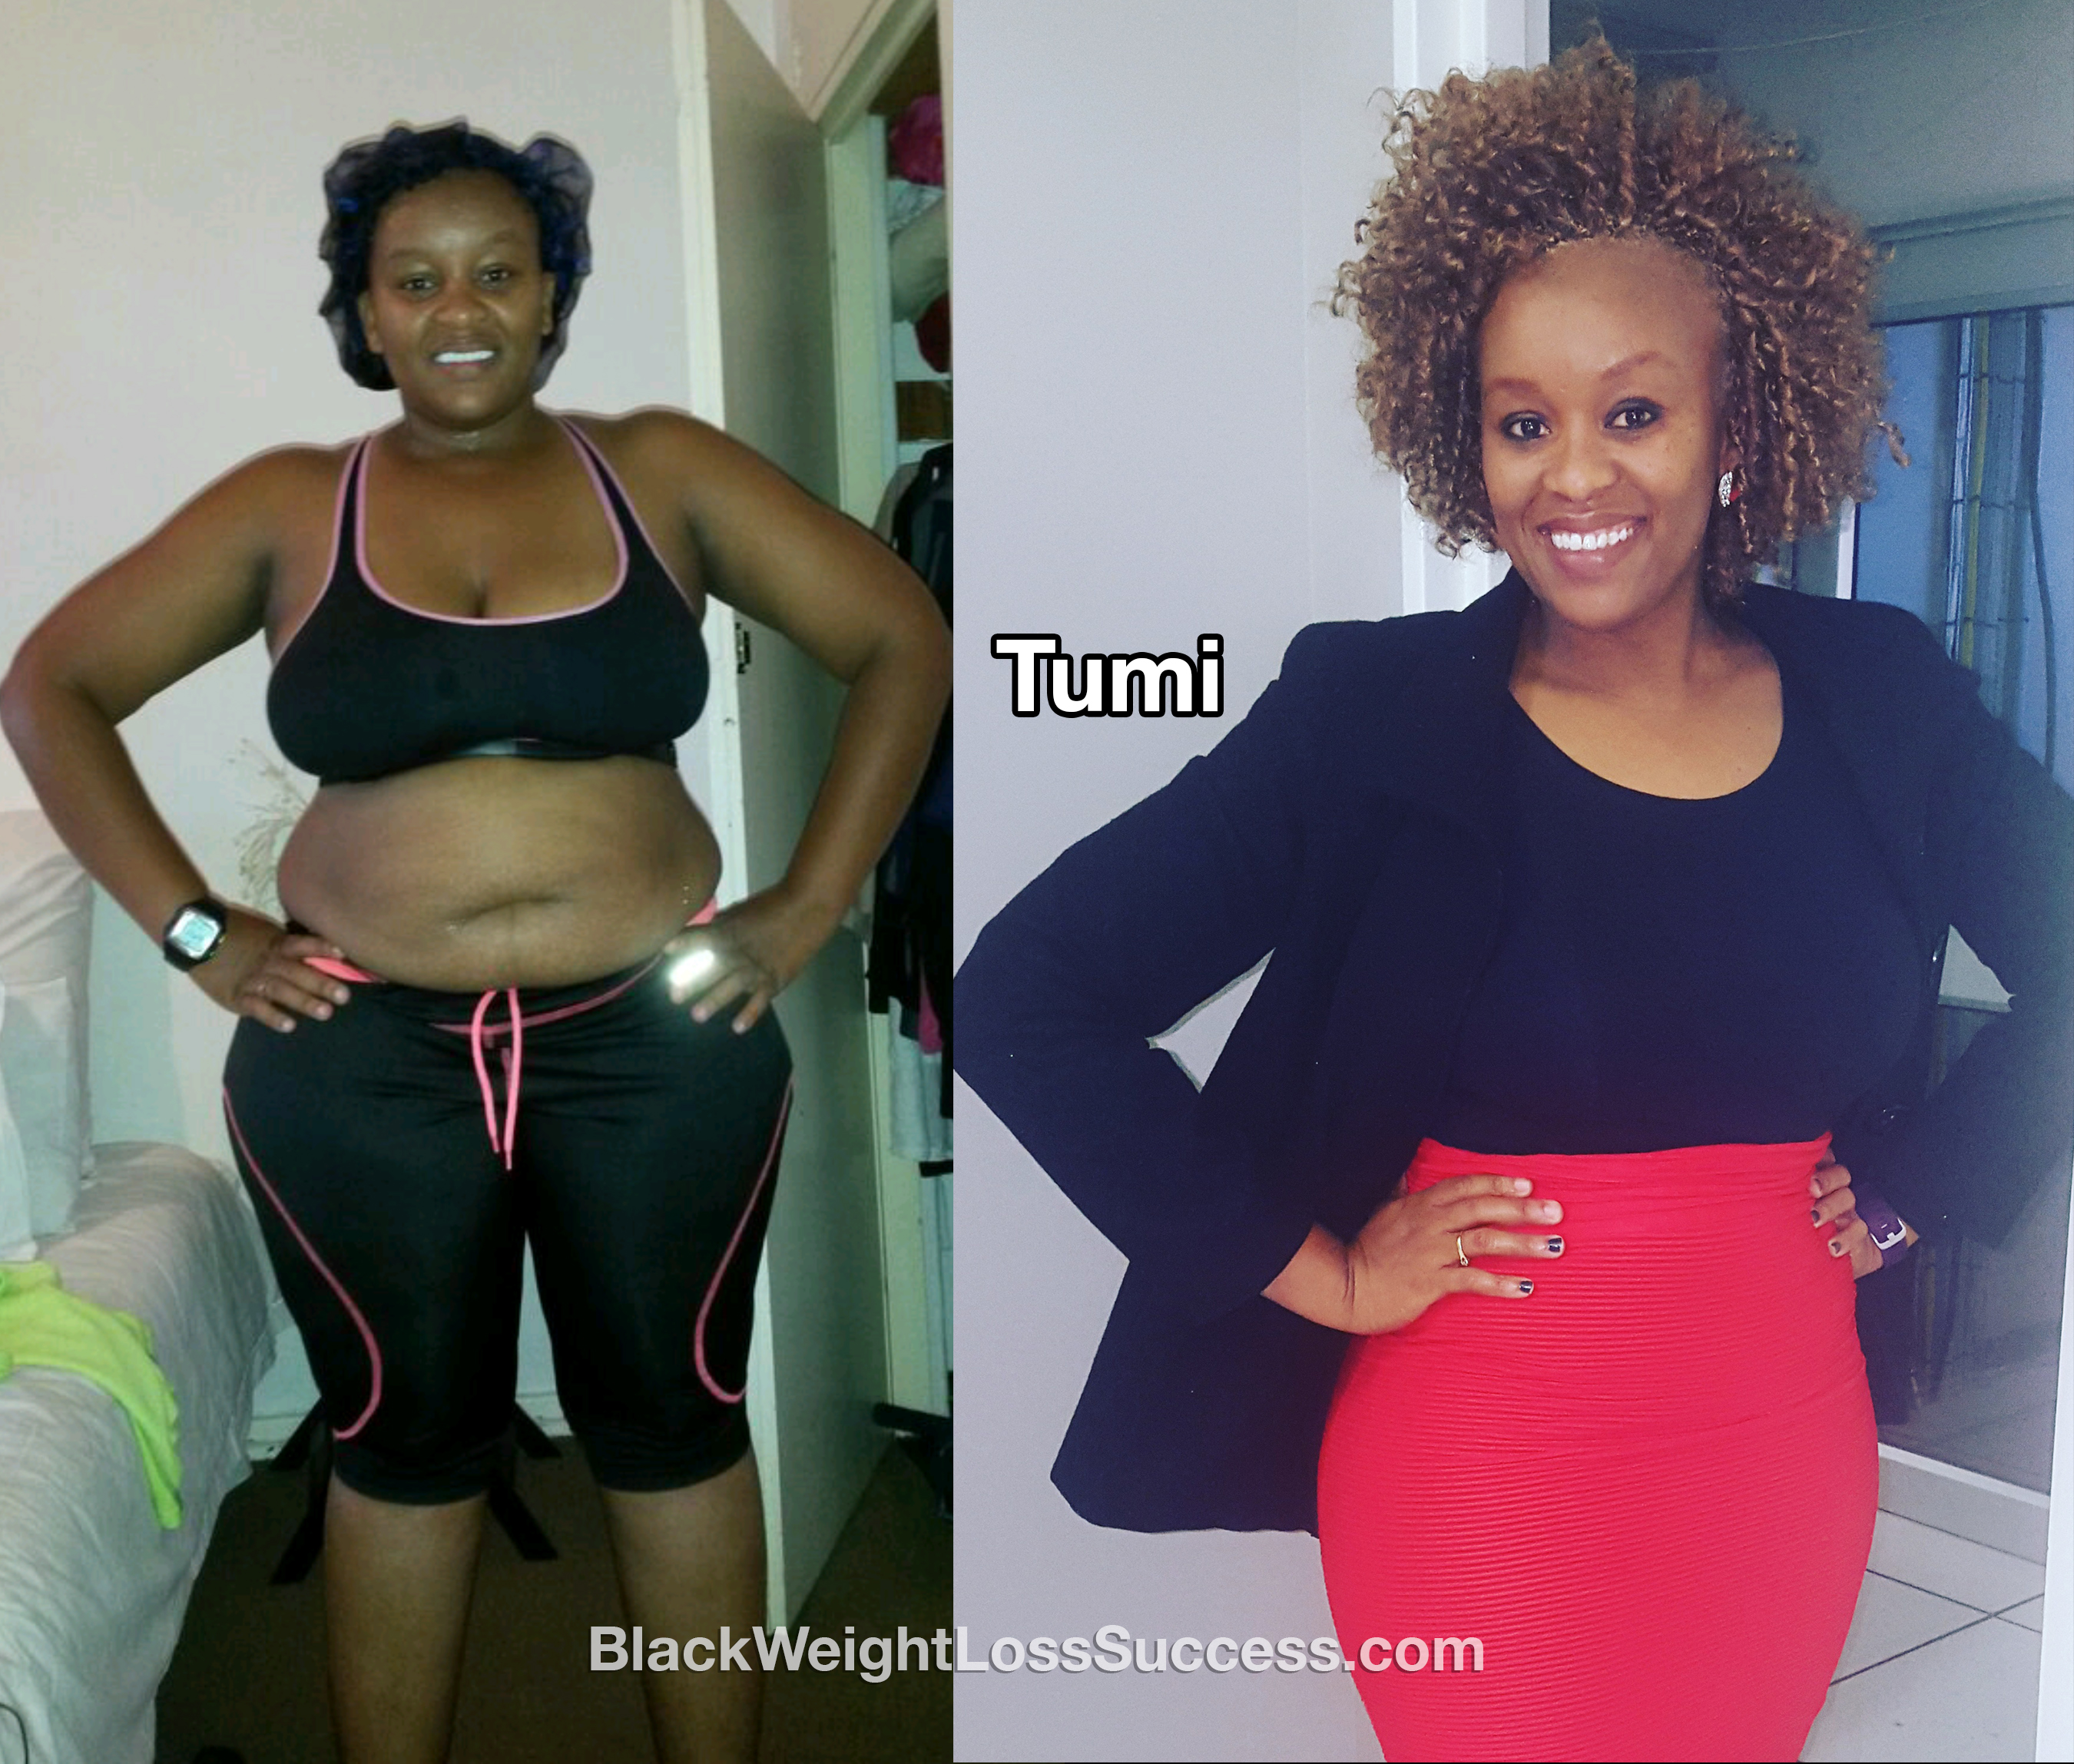 Veronica lost 132 pounds | Black Weight Loss Success 